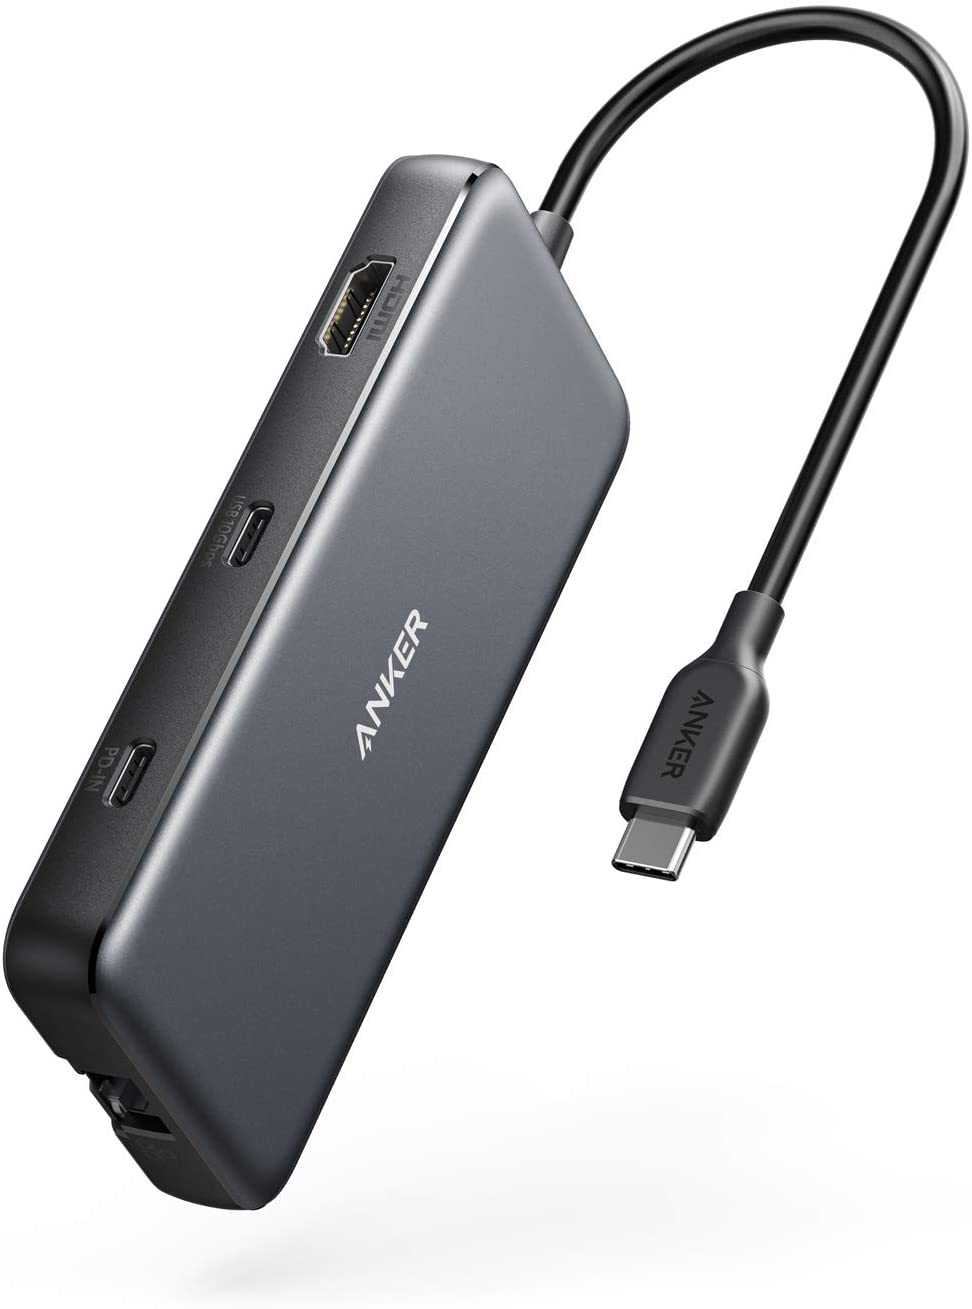 Anker、新型USB-Cハブ｢Anker PowerExpand 8-in-1 USB-C PD 10Gbps データ ハブ｣を発売